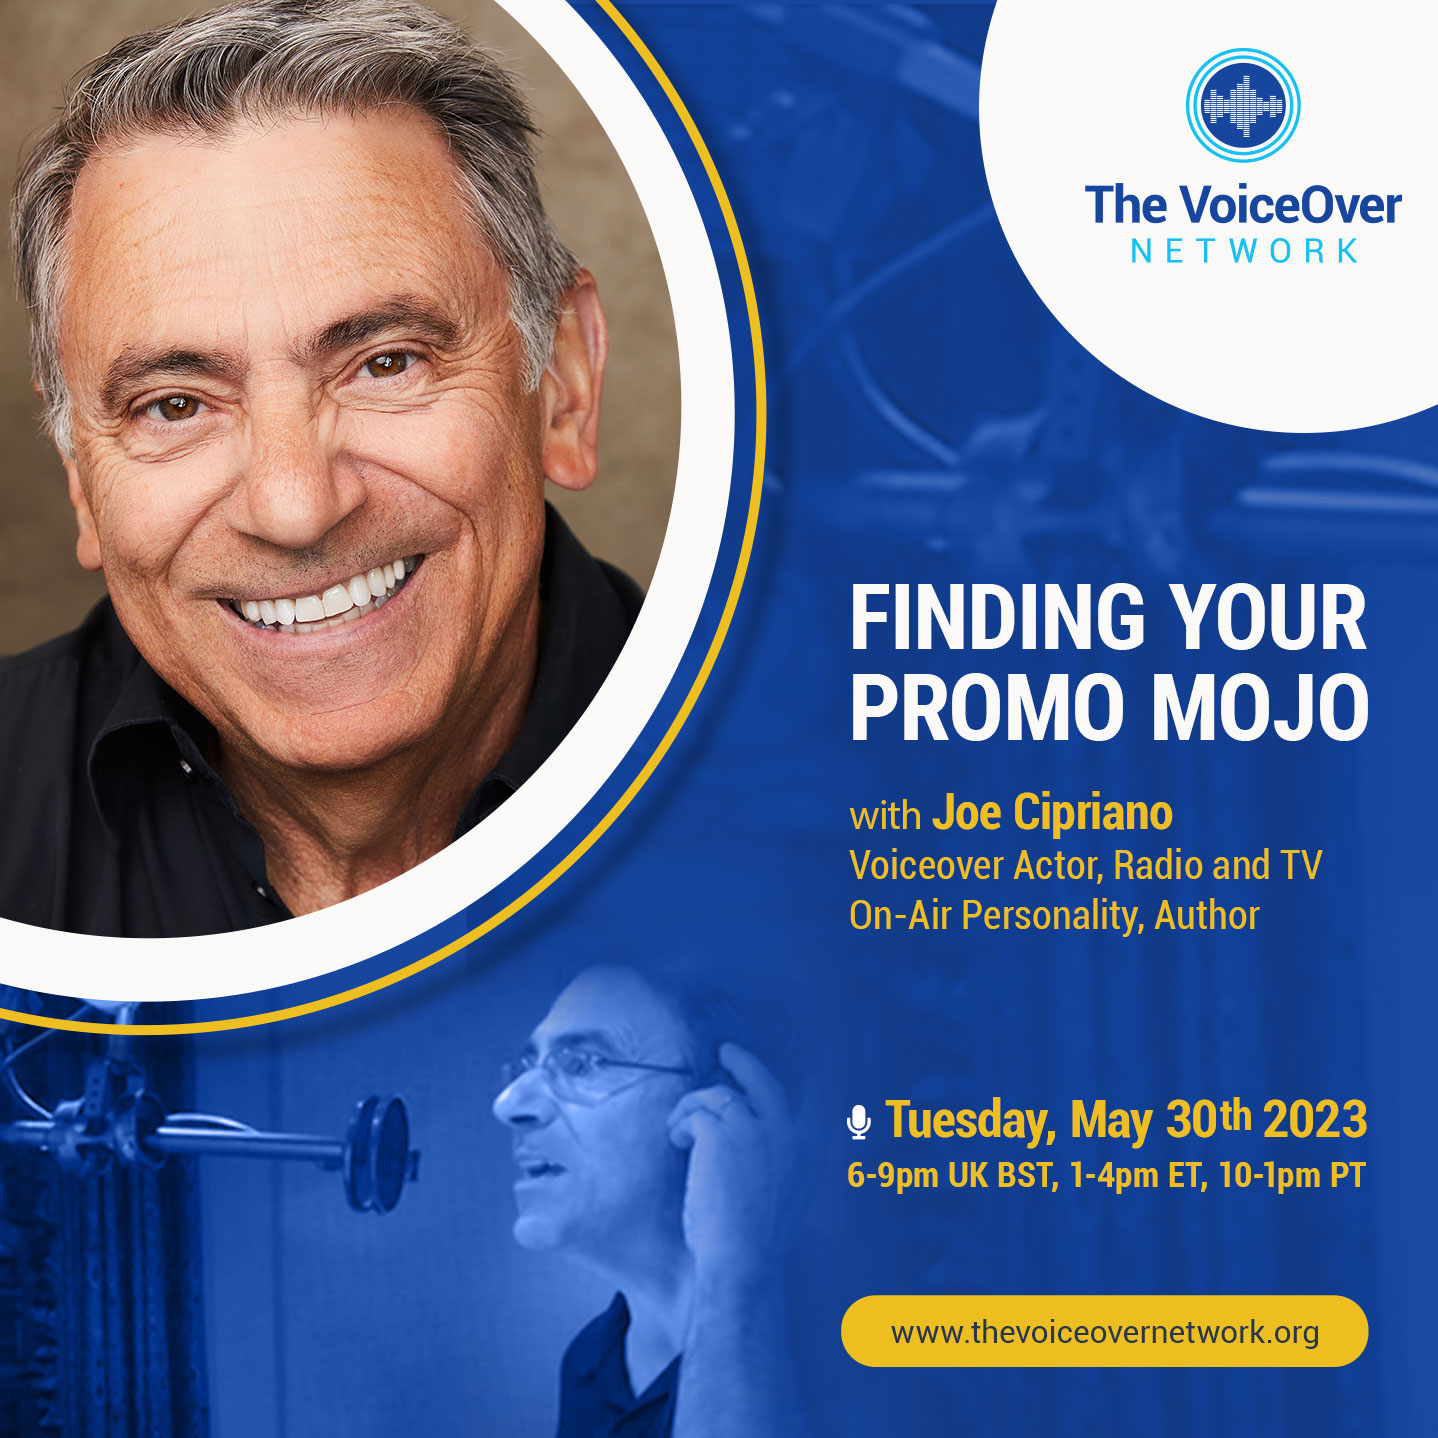 Finding Your Promo MoJo with Joe Cipriano